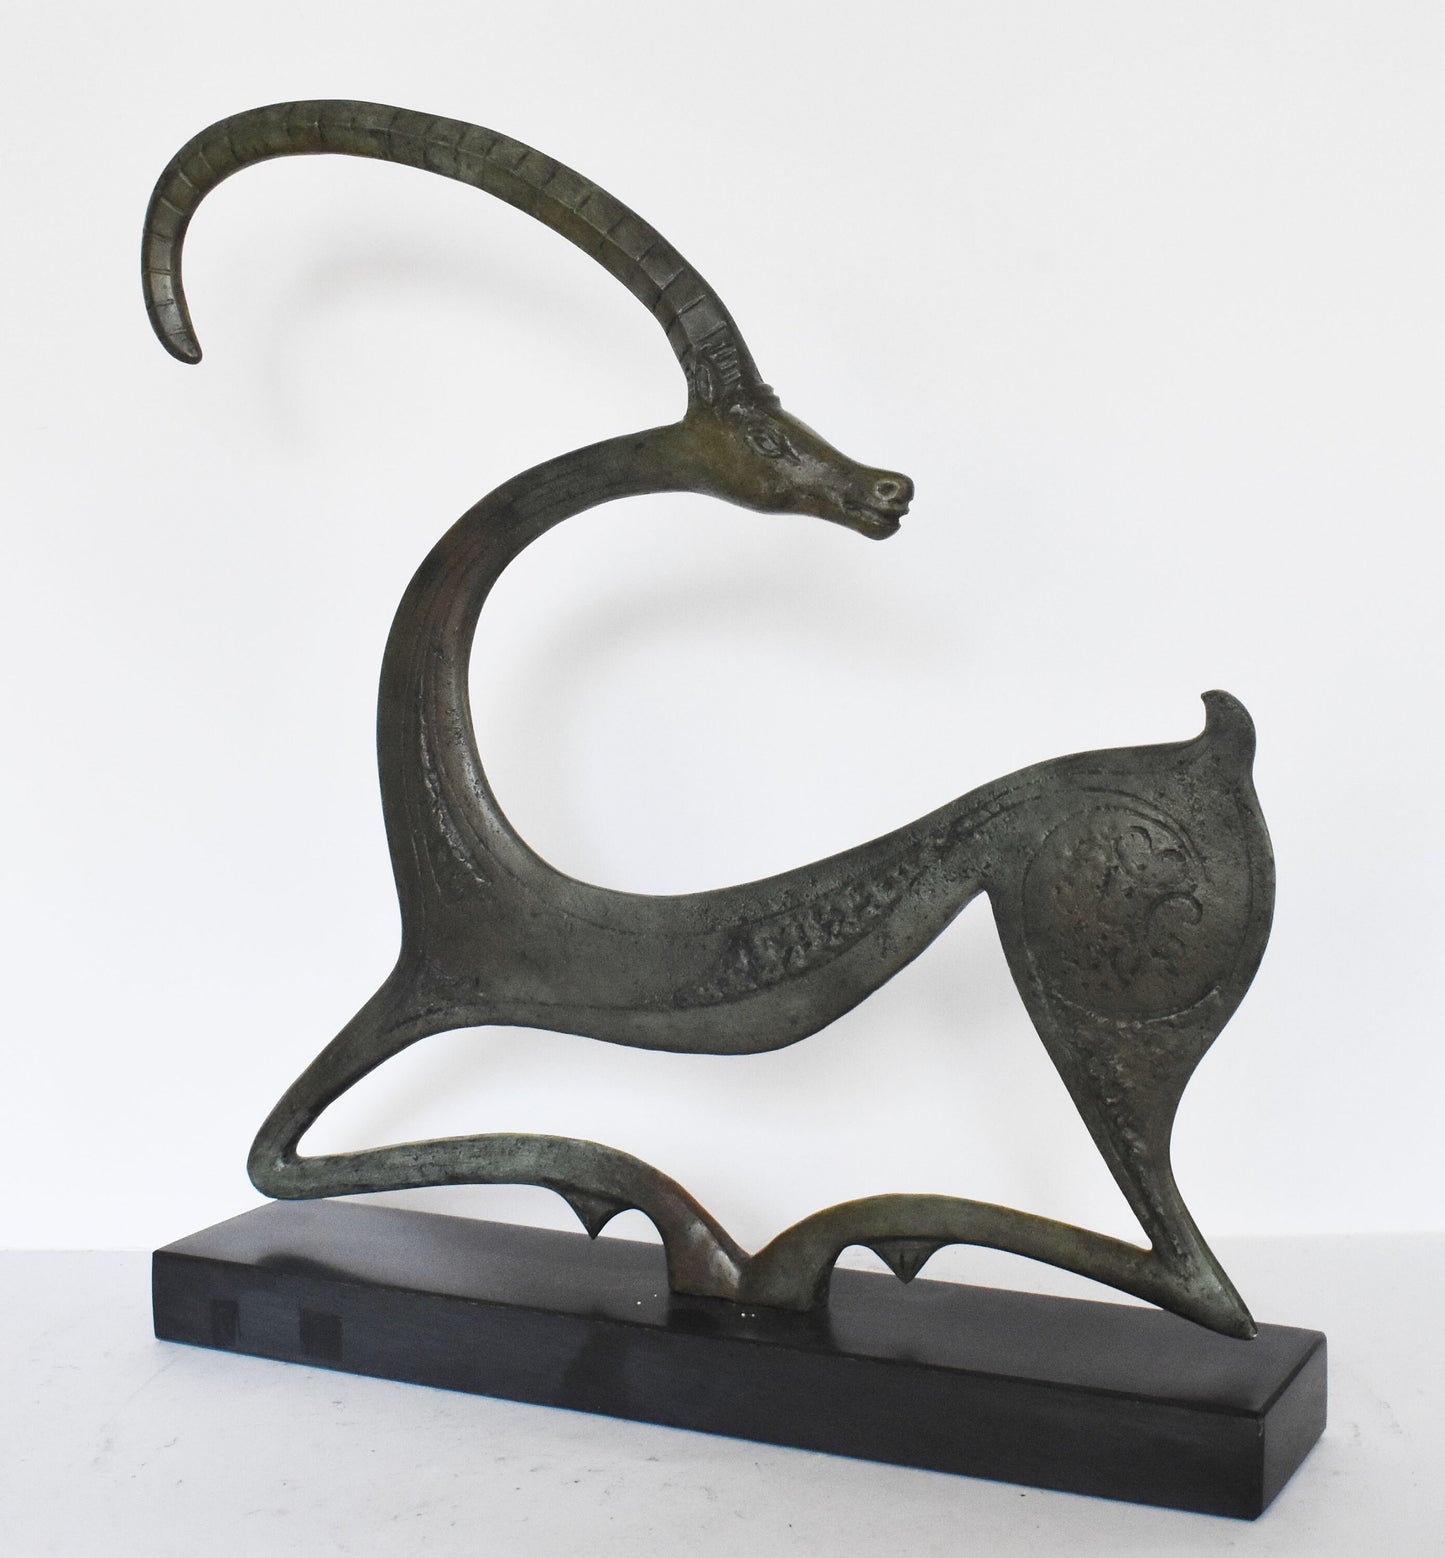 Graceful Ibex - Bronze - Symbol of Energy, Long Life, Fertility - By scaling vertical heights, the ibex teaches courage and conquering fear